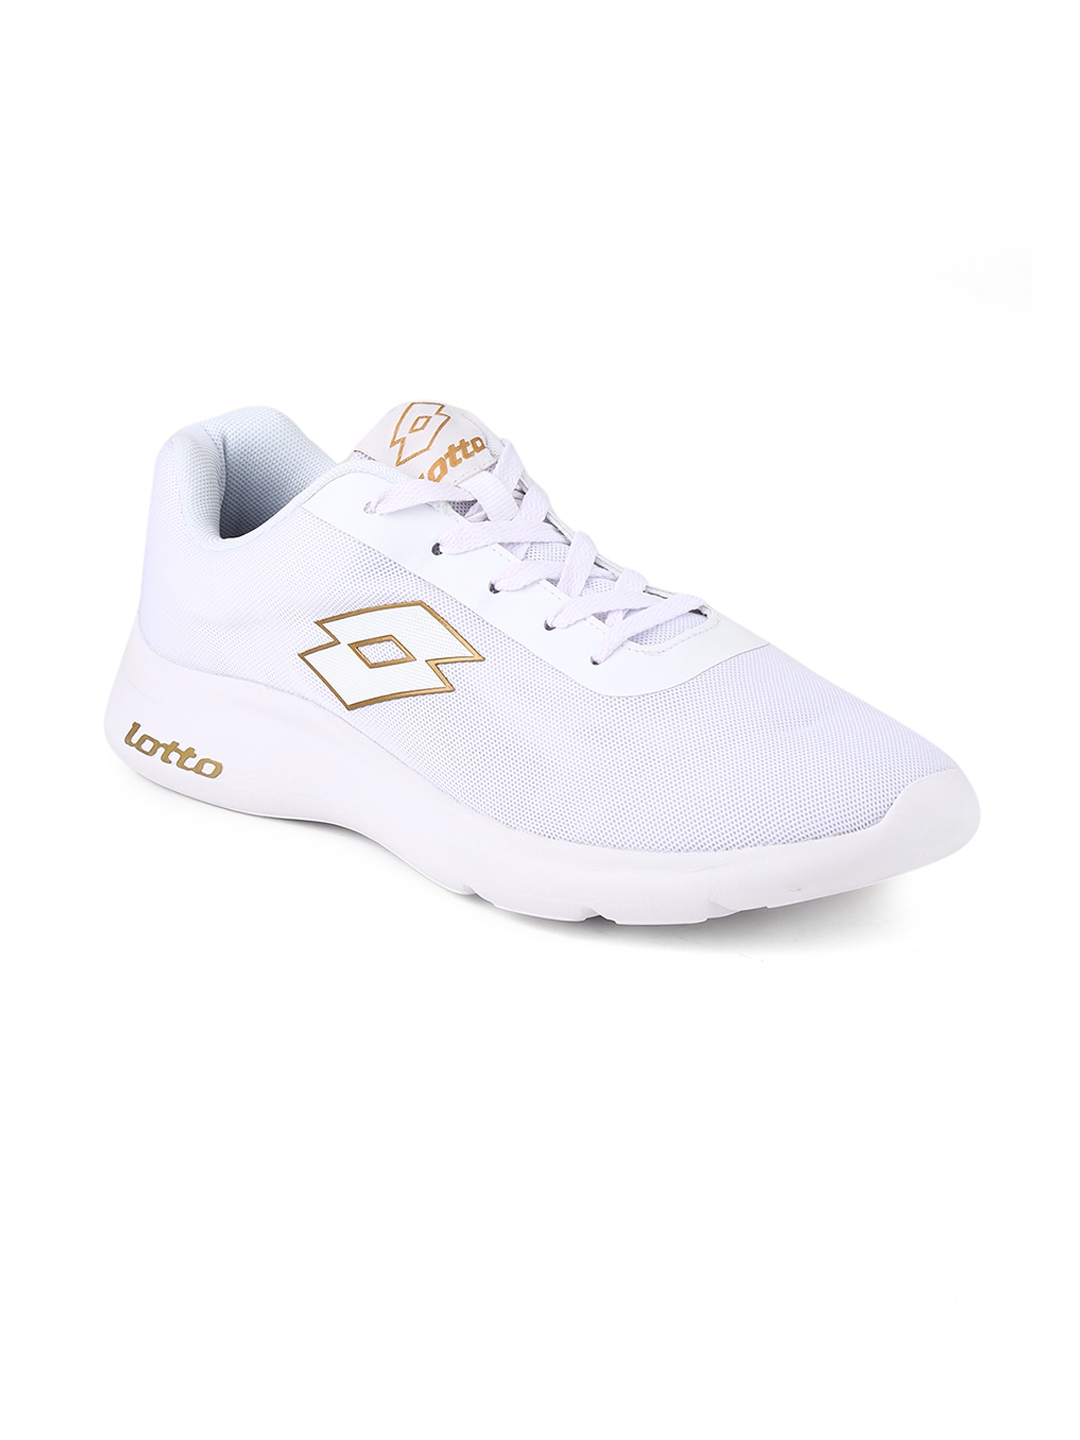 Lotto | Lotto Men's Victor Amf White Running Shoes